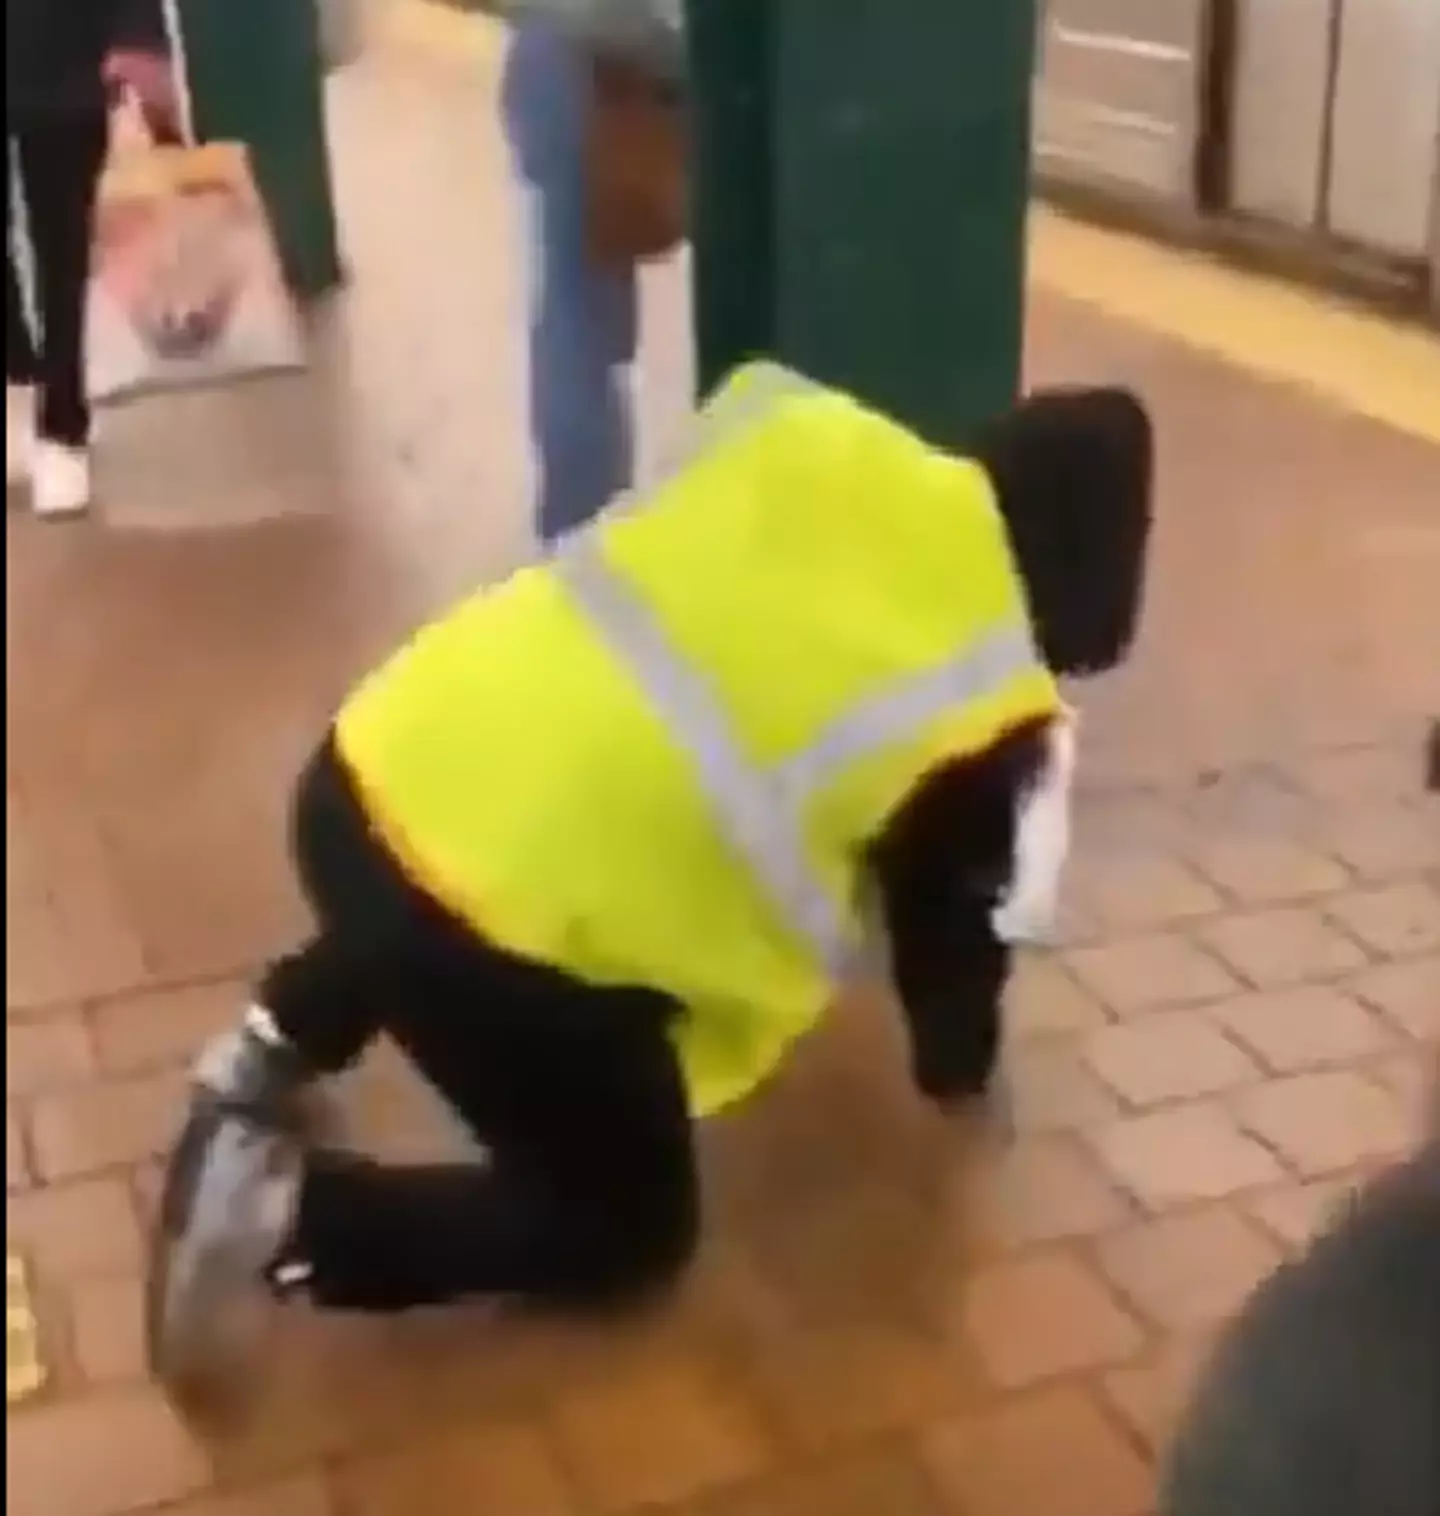 Nearby people helped the man up after the incident. (@retronyc/Instagram)